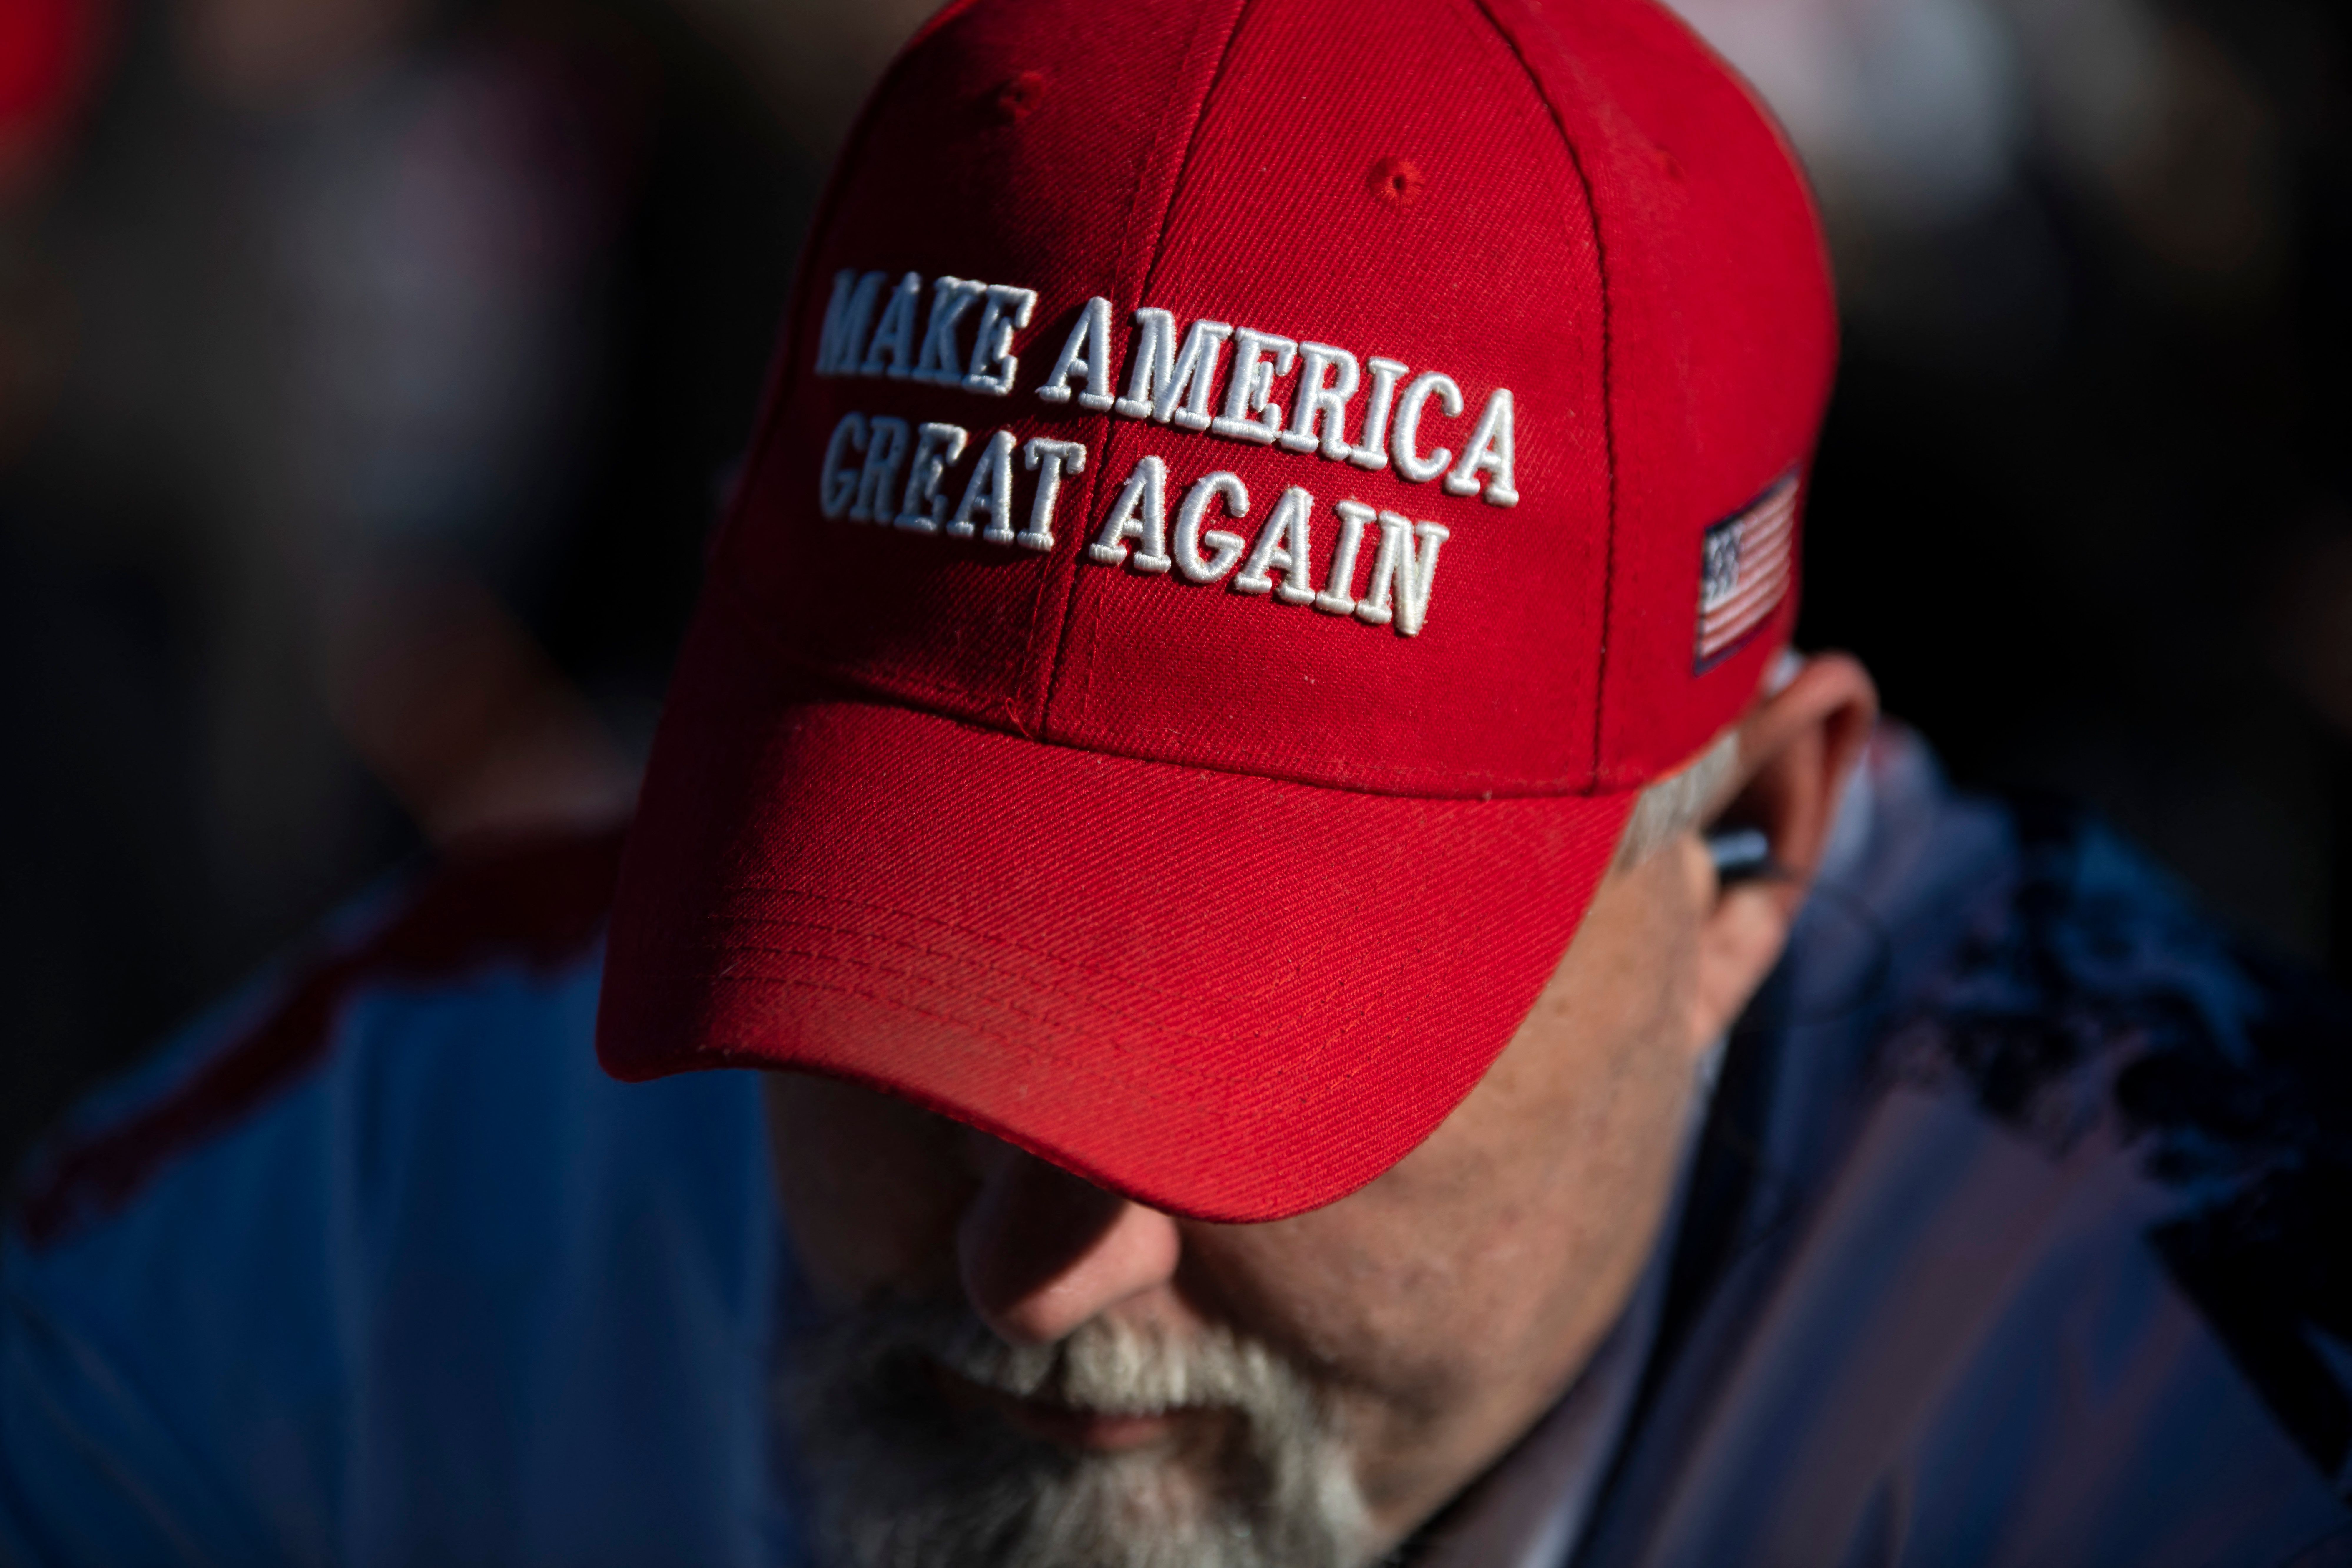 An attendee wearing a MAGA hat waits before former US President Donald Trump speaks during a "Save America" rally in Conroe, Texas on January 29, 2022. (Photo by MARK FELIX/AFP /AFP via Getty Images)